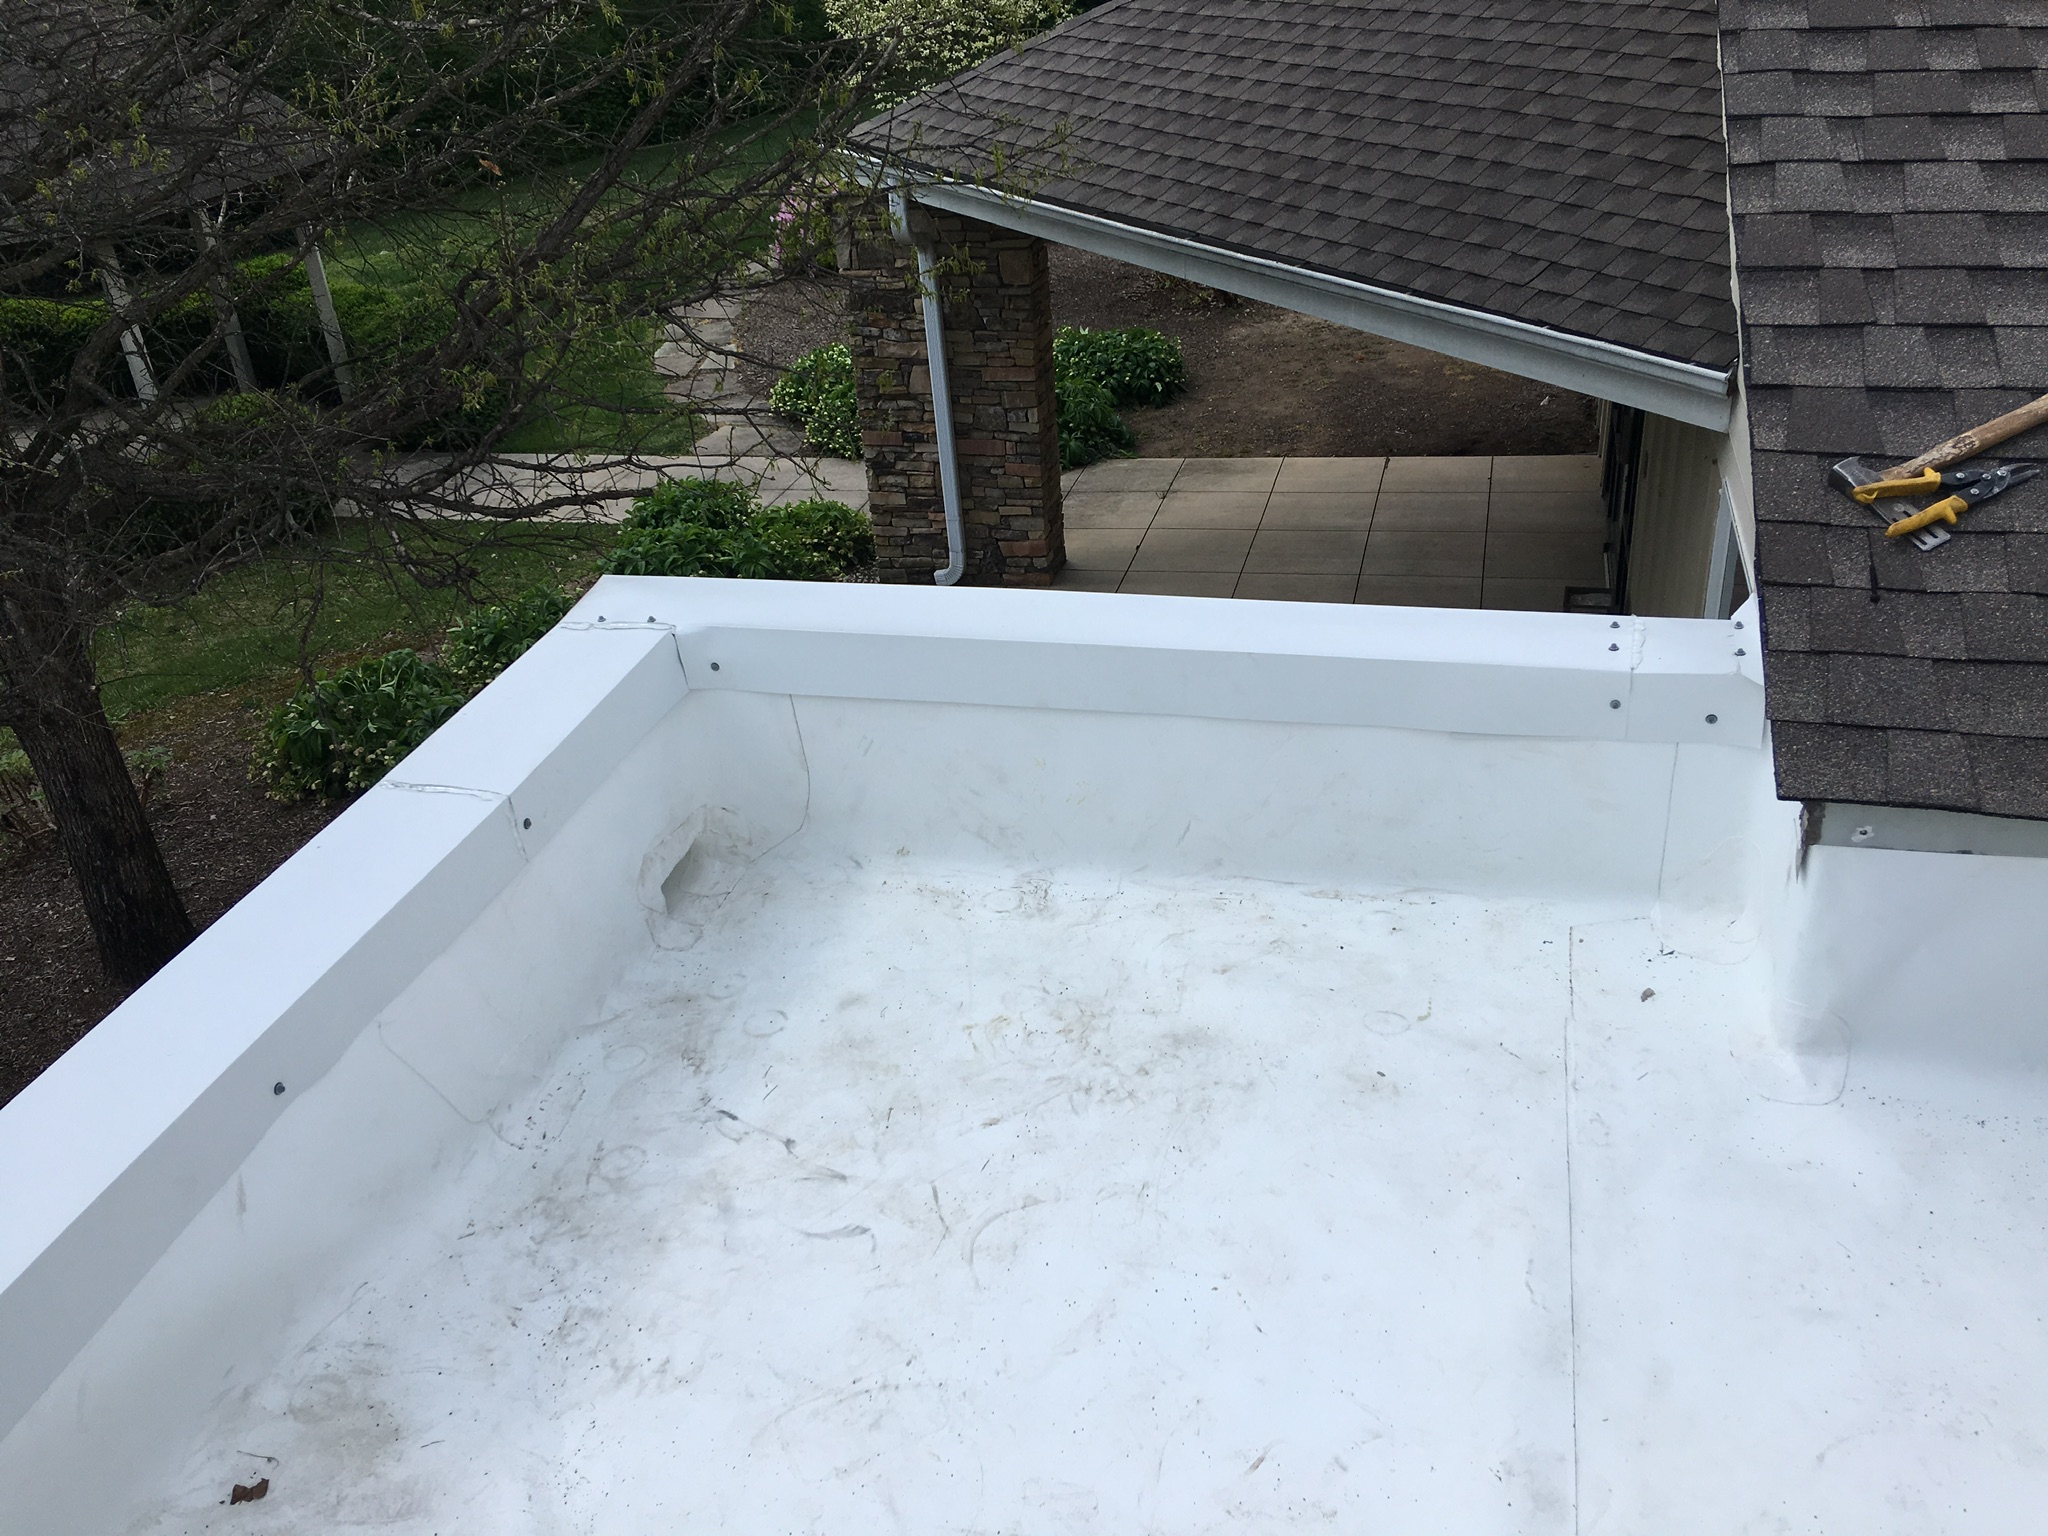 This is an overview of the completed installation of the white TPO membrane roof.